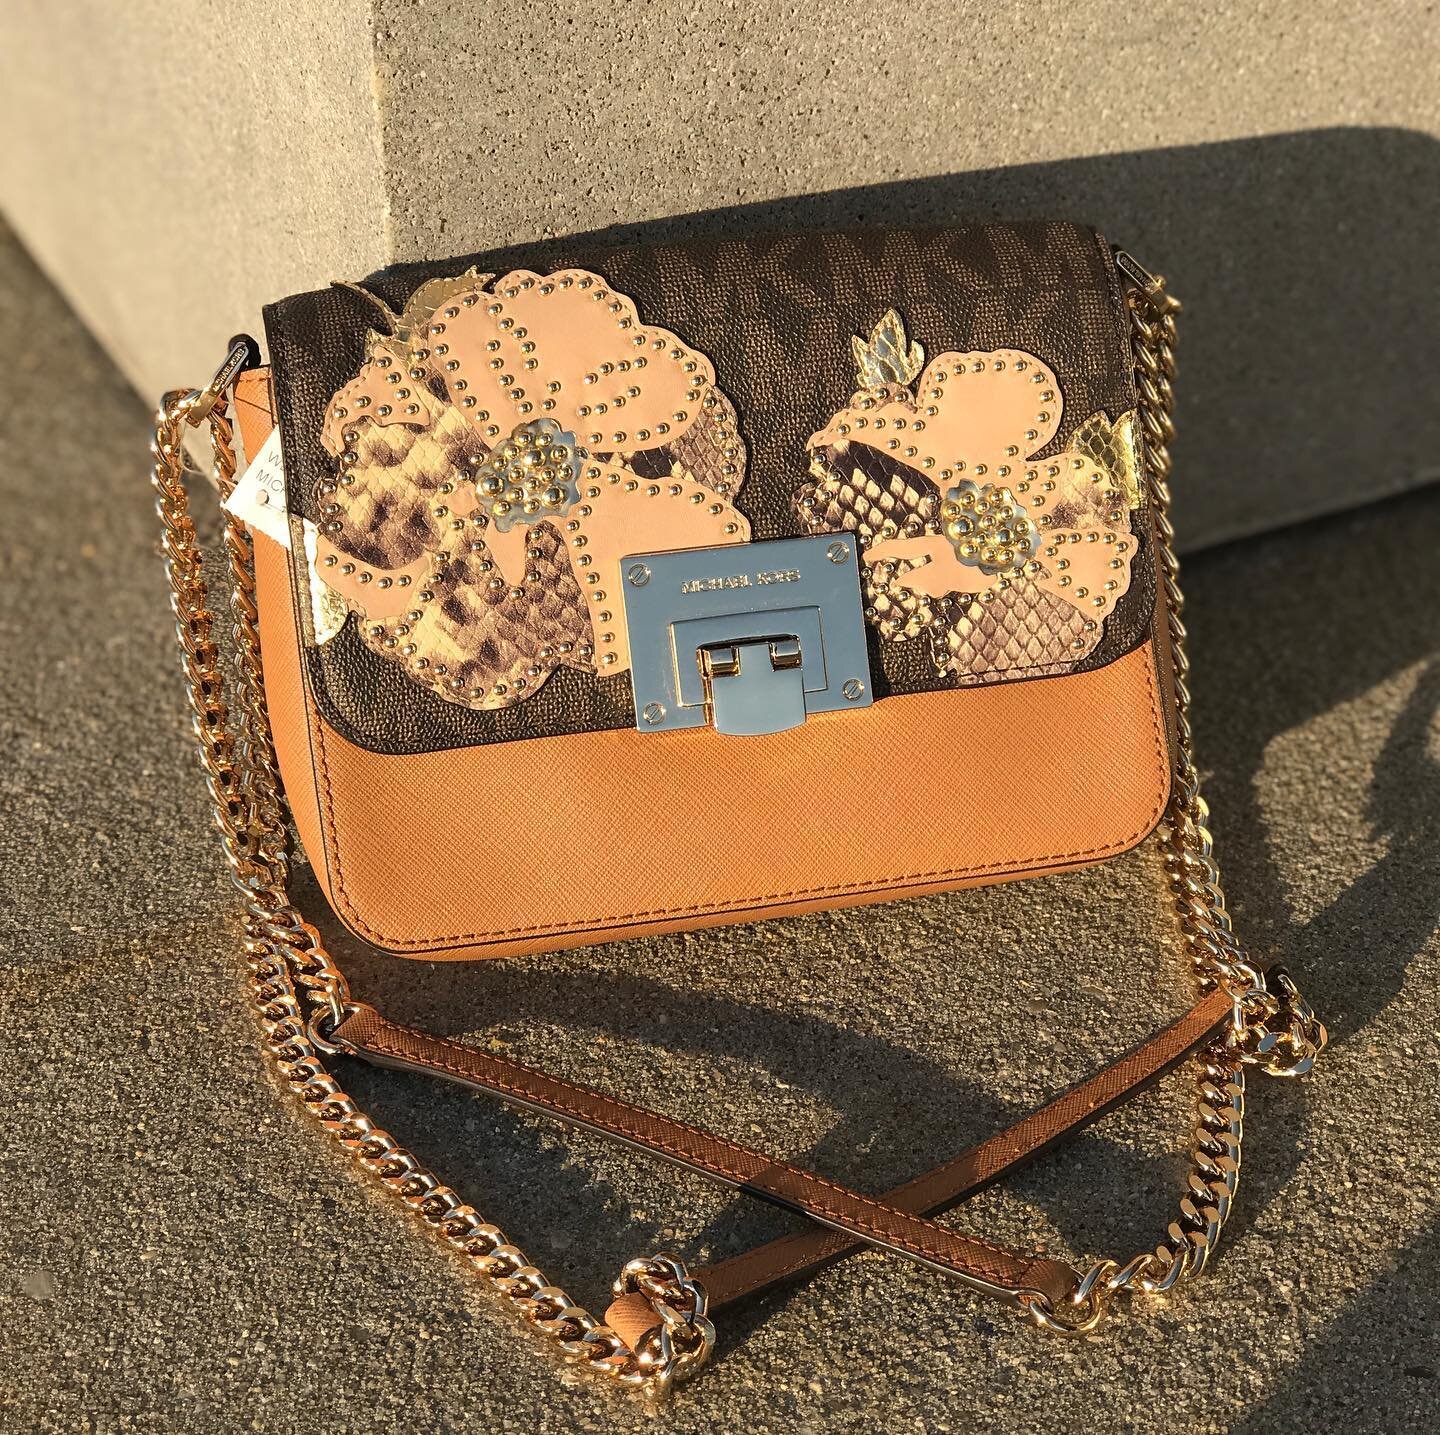 &hearts;️👜So cute the floral detailing on this bag with an adjustable strap to wear multiple ways!! $74.95👜&hearts;️
&bull;
For inquiries, please call or email us!
☎️ 267-807-1295 
📧snyder@greenestreet.com 
&bull;
@shopgreenestreet 
@greenestreets